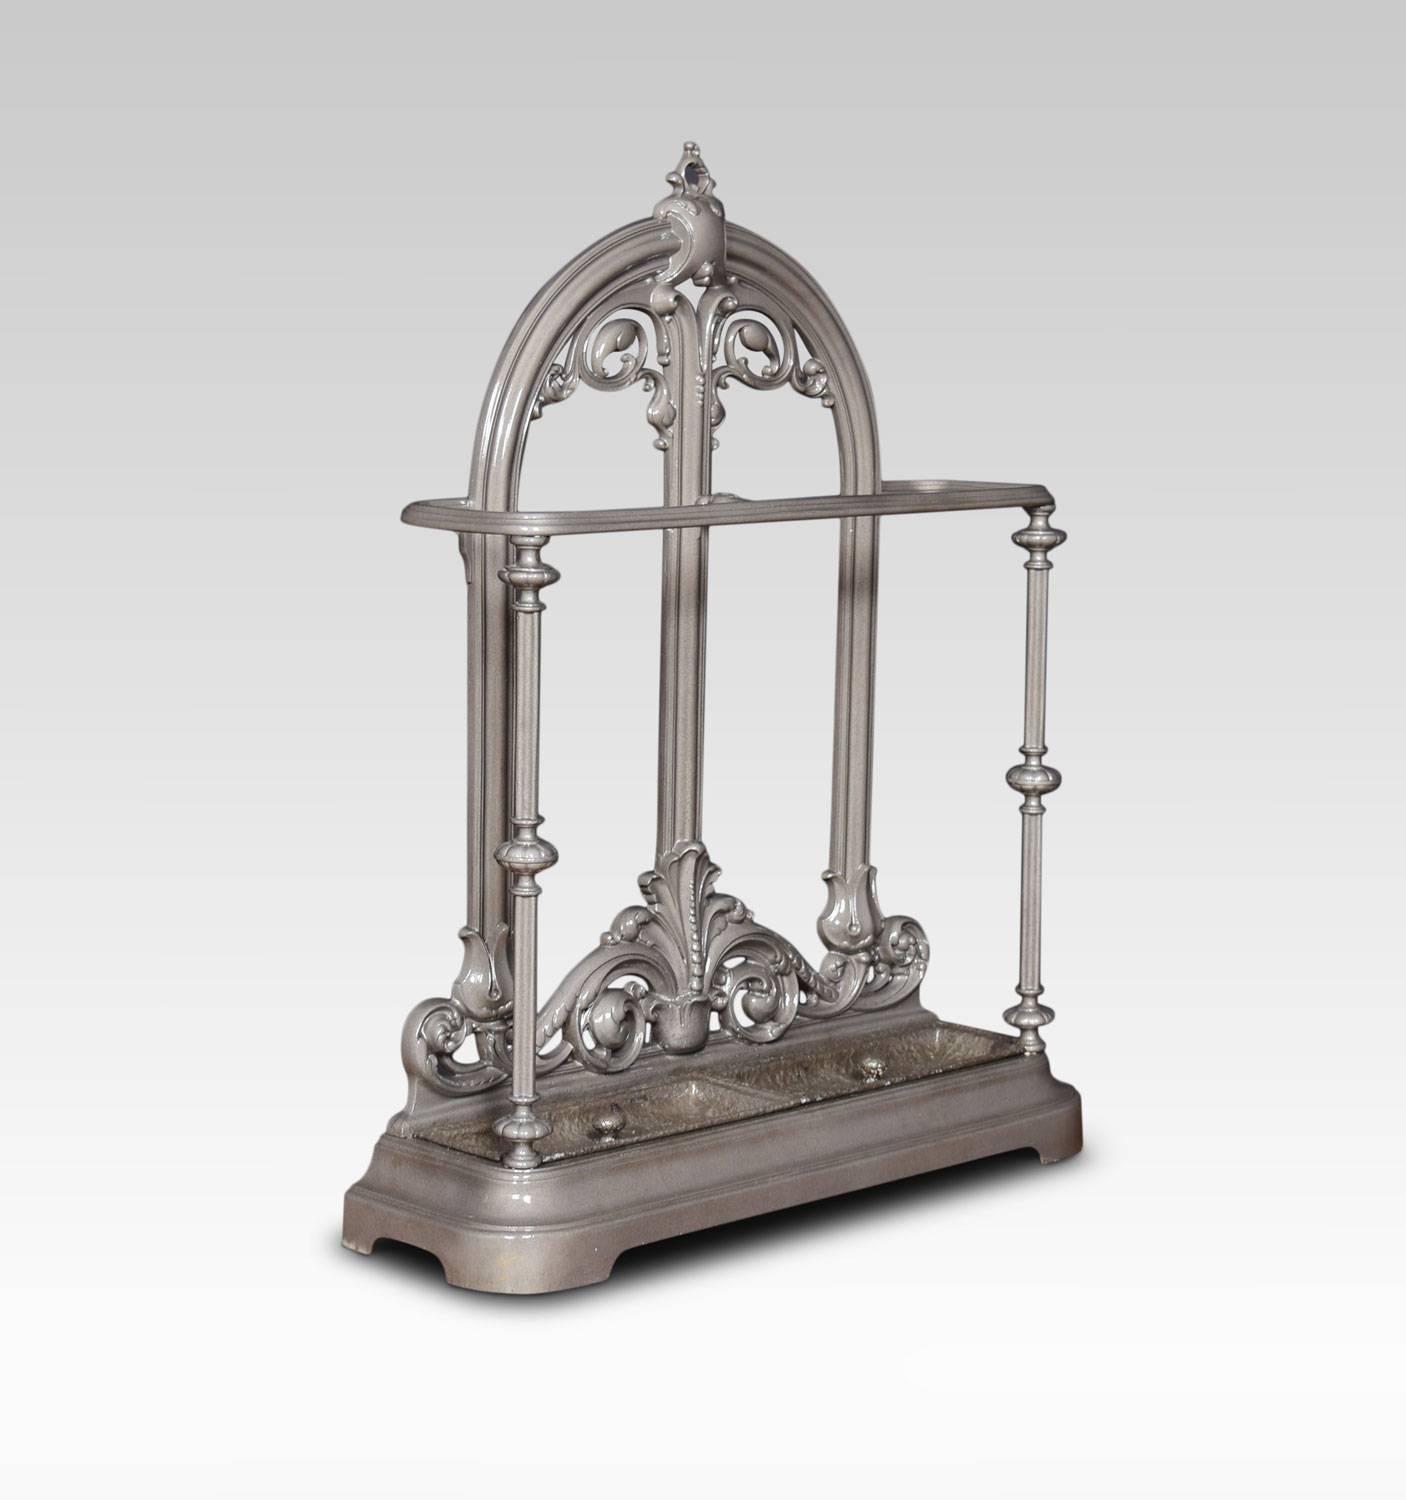 Victorian cast Iron stick stand, the shaped top with foliating motif above shaped bar to receive sticks and umbrellas, the base with original drip trays and raised on shaped platform.
Dimensions
Height 38 inches
Width 30.5 inches
Depth 9 inches.